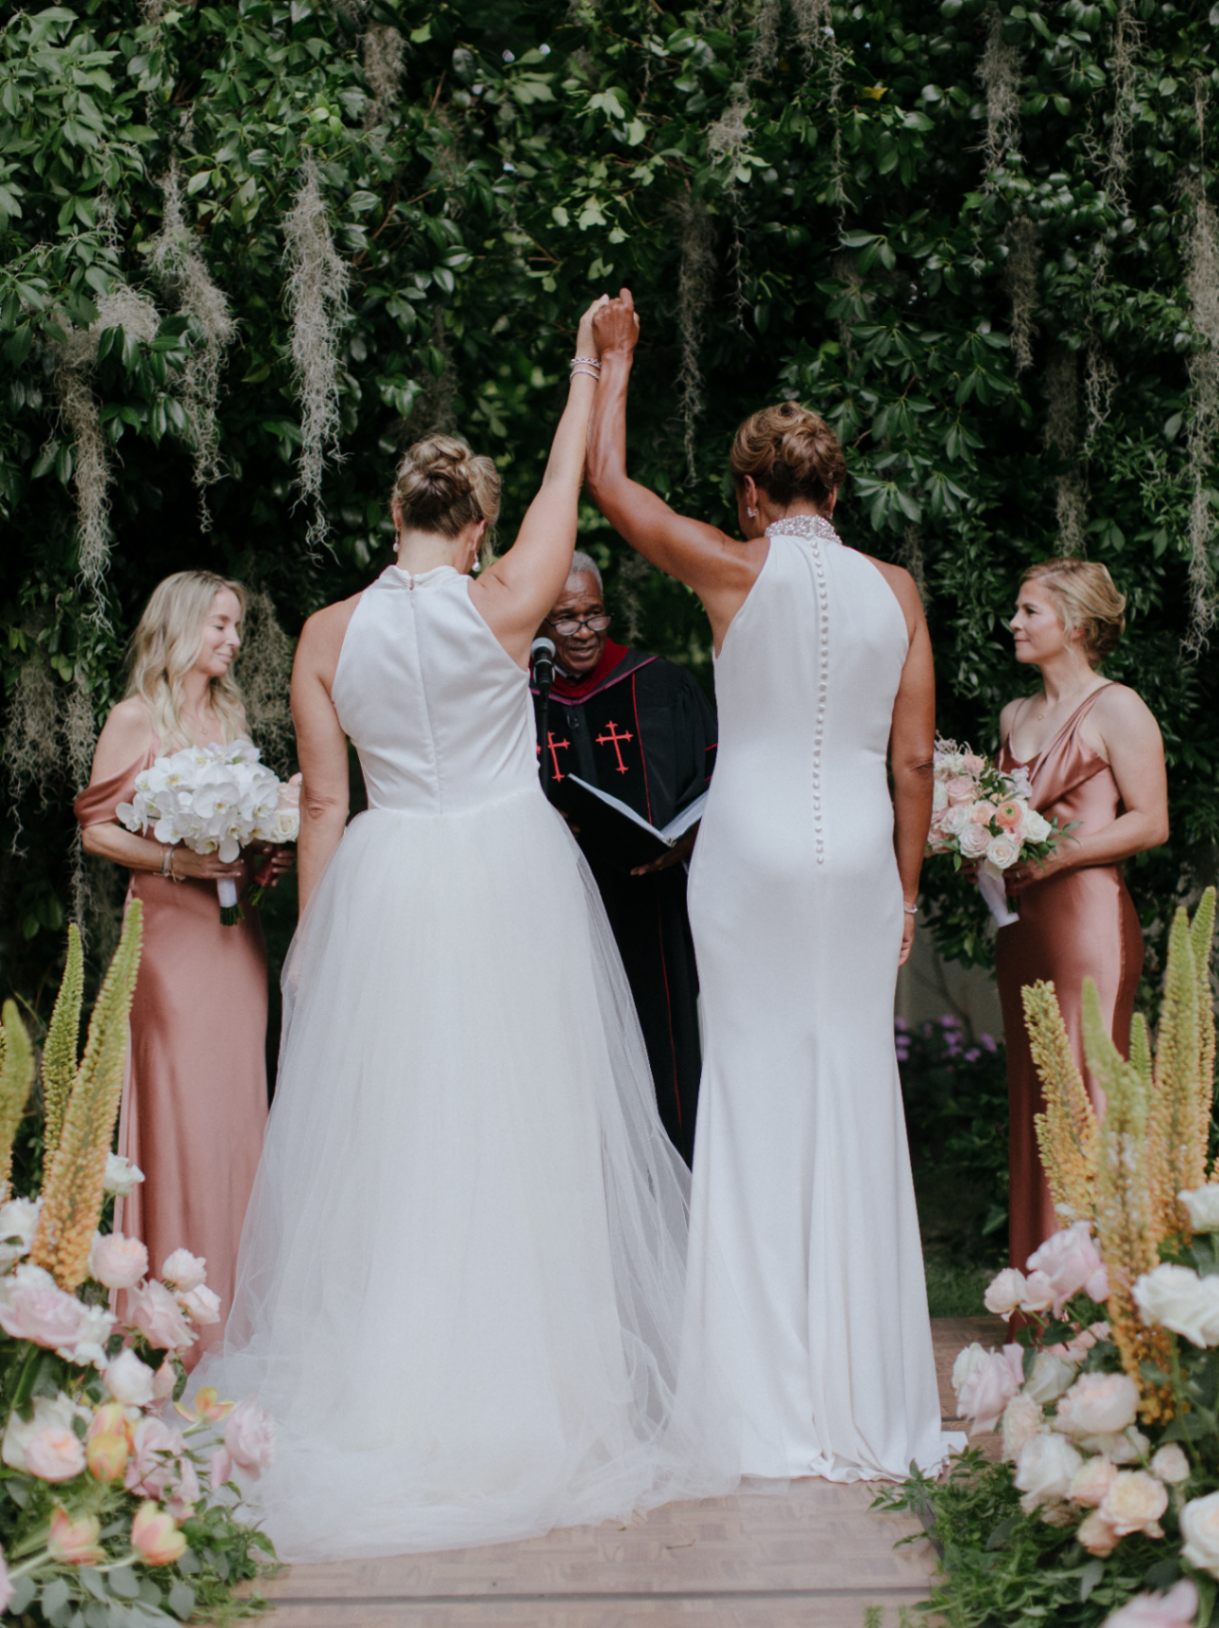 Robin Roberts and Amber Laign, a celebrity lesbian couple, hold up their hands together during their wedding. The brides are wearing white Badgley Mischka wedding gowns.